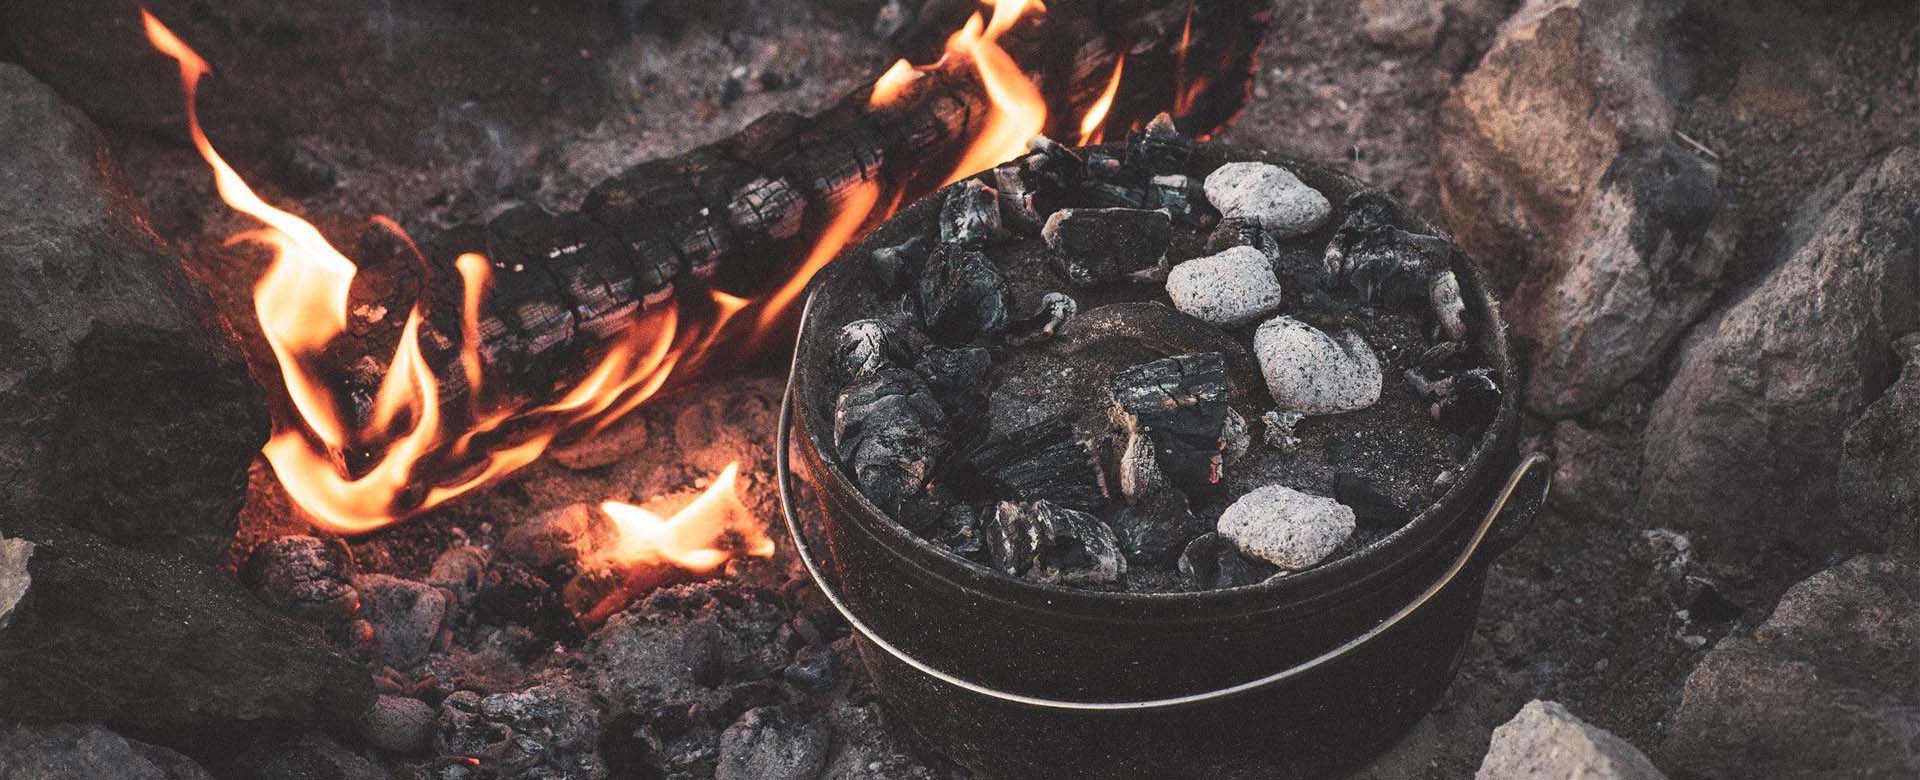 Dutch Oven Cooking with Charcoal Briquettes